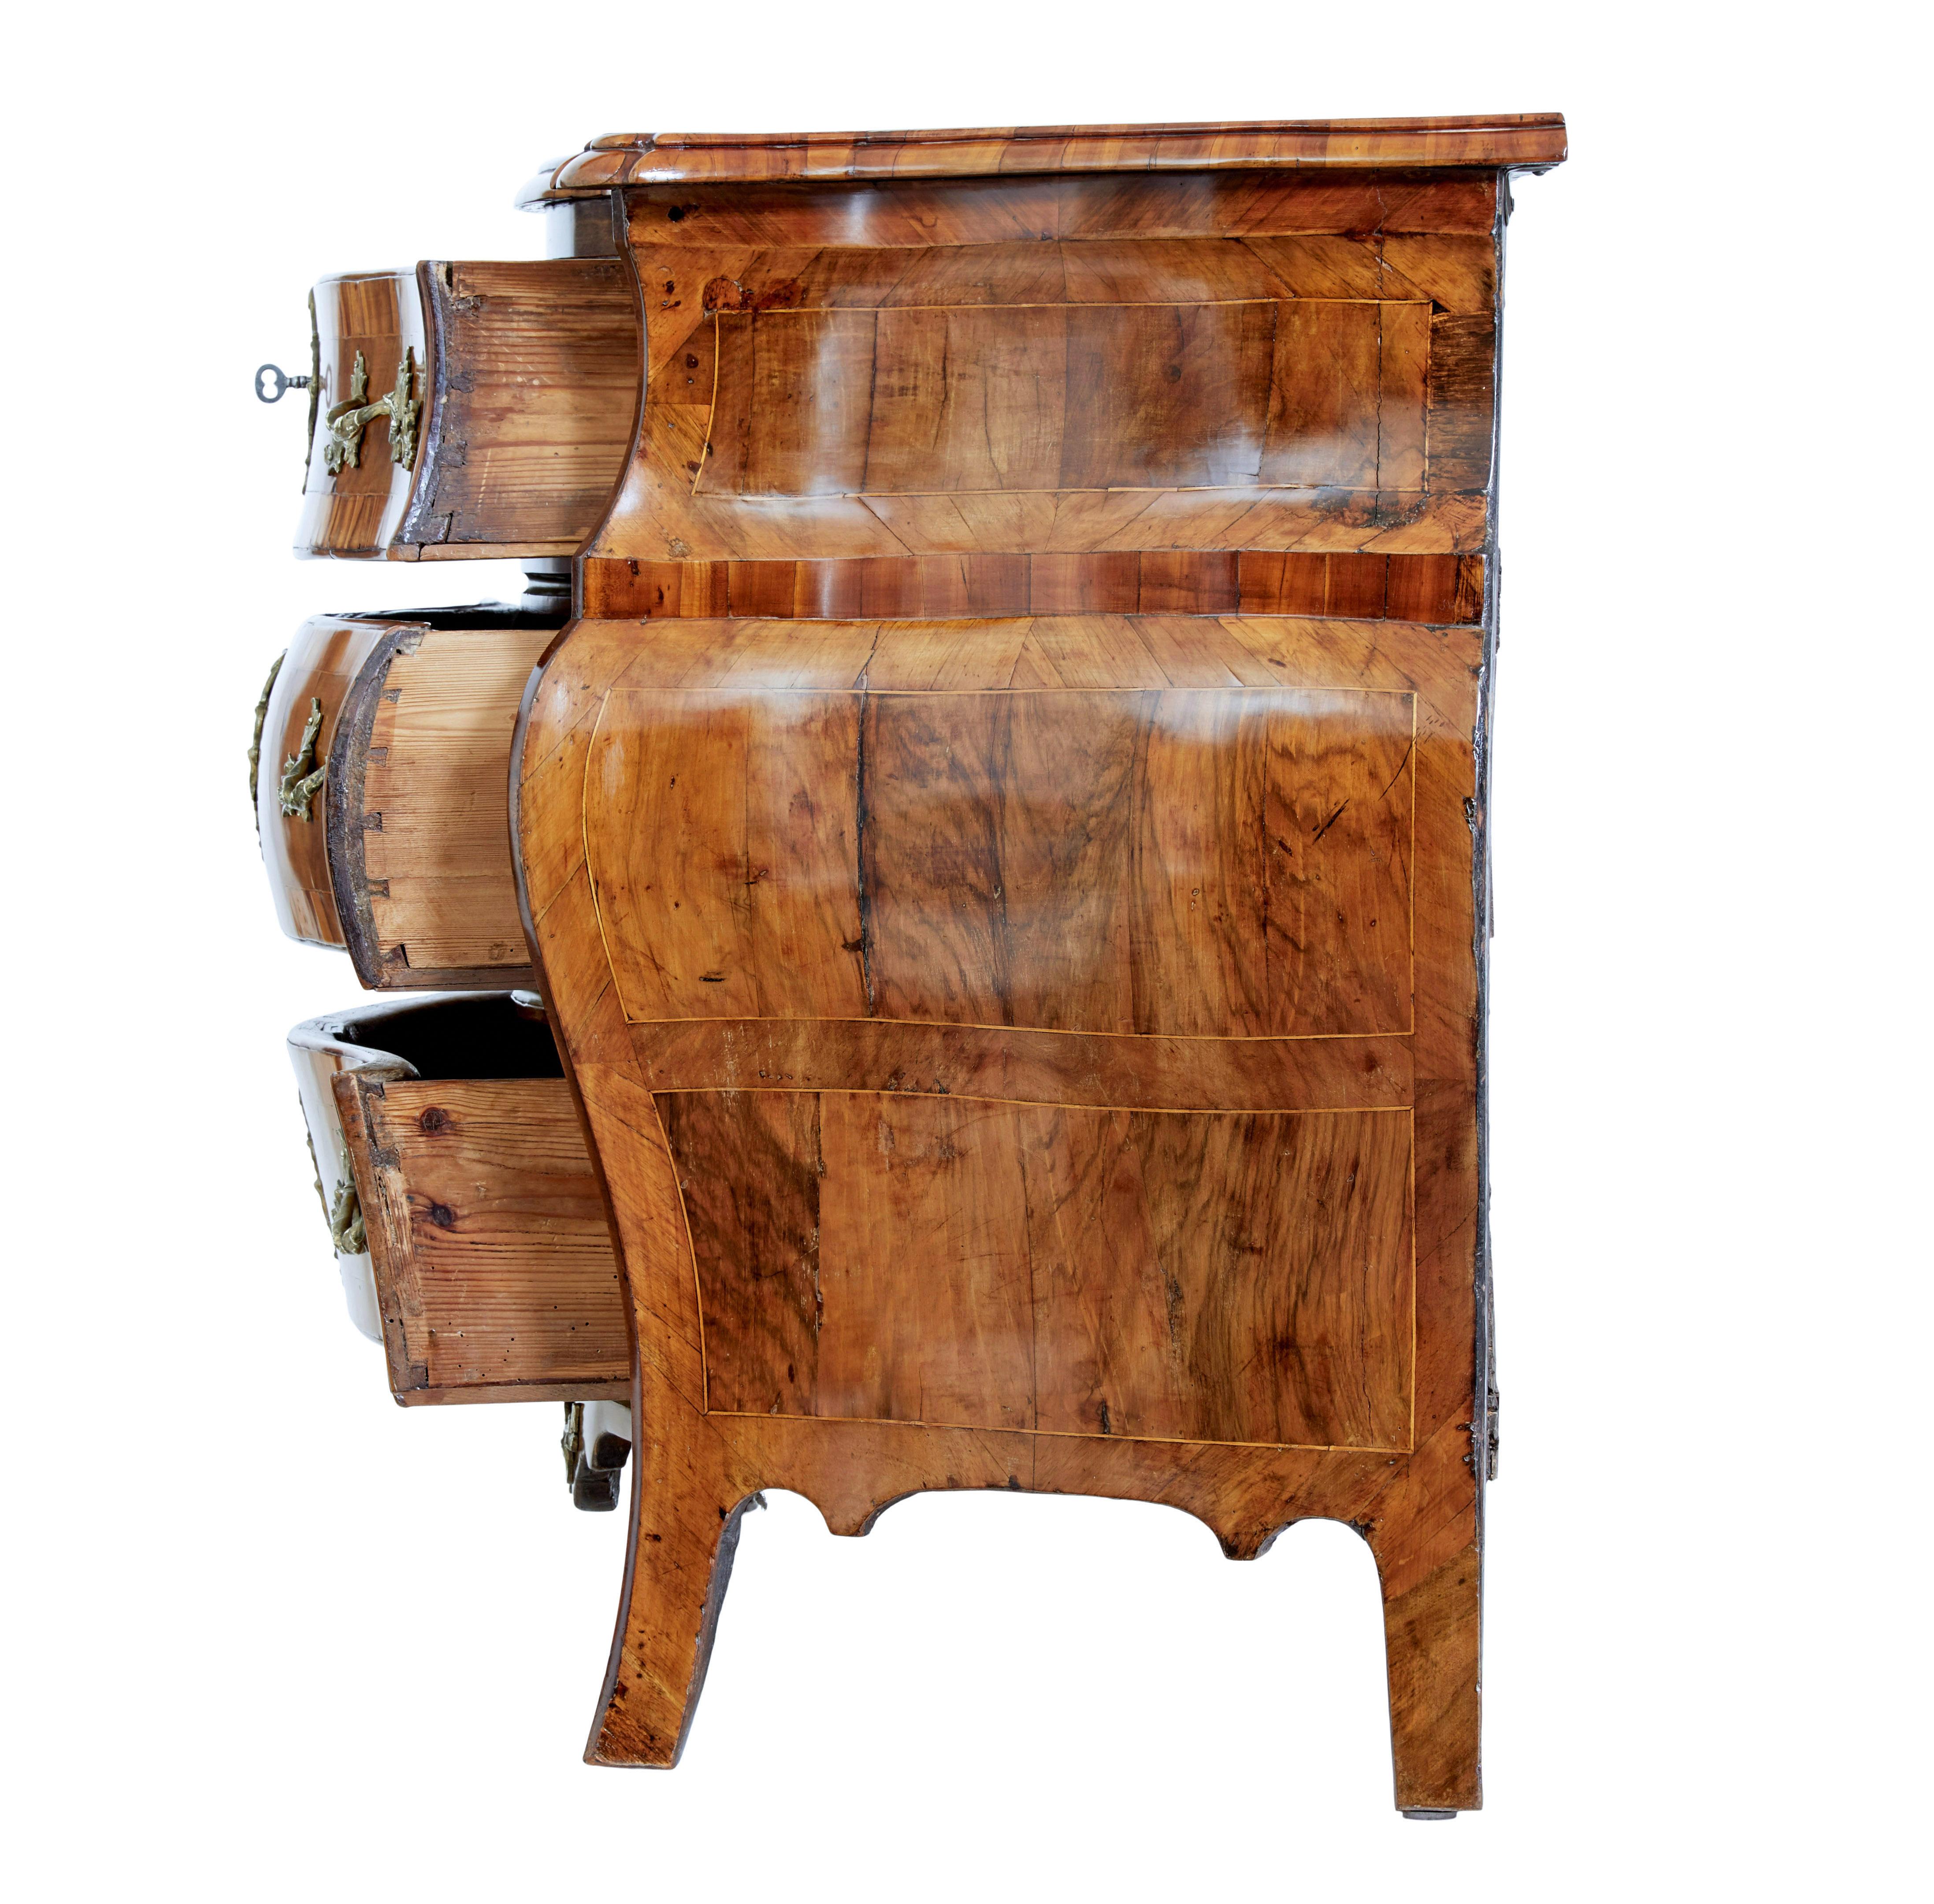 Rococo Revival Early 19th century inlaid walnut bombe commode For Sale